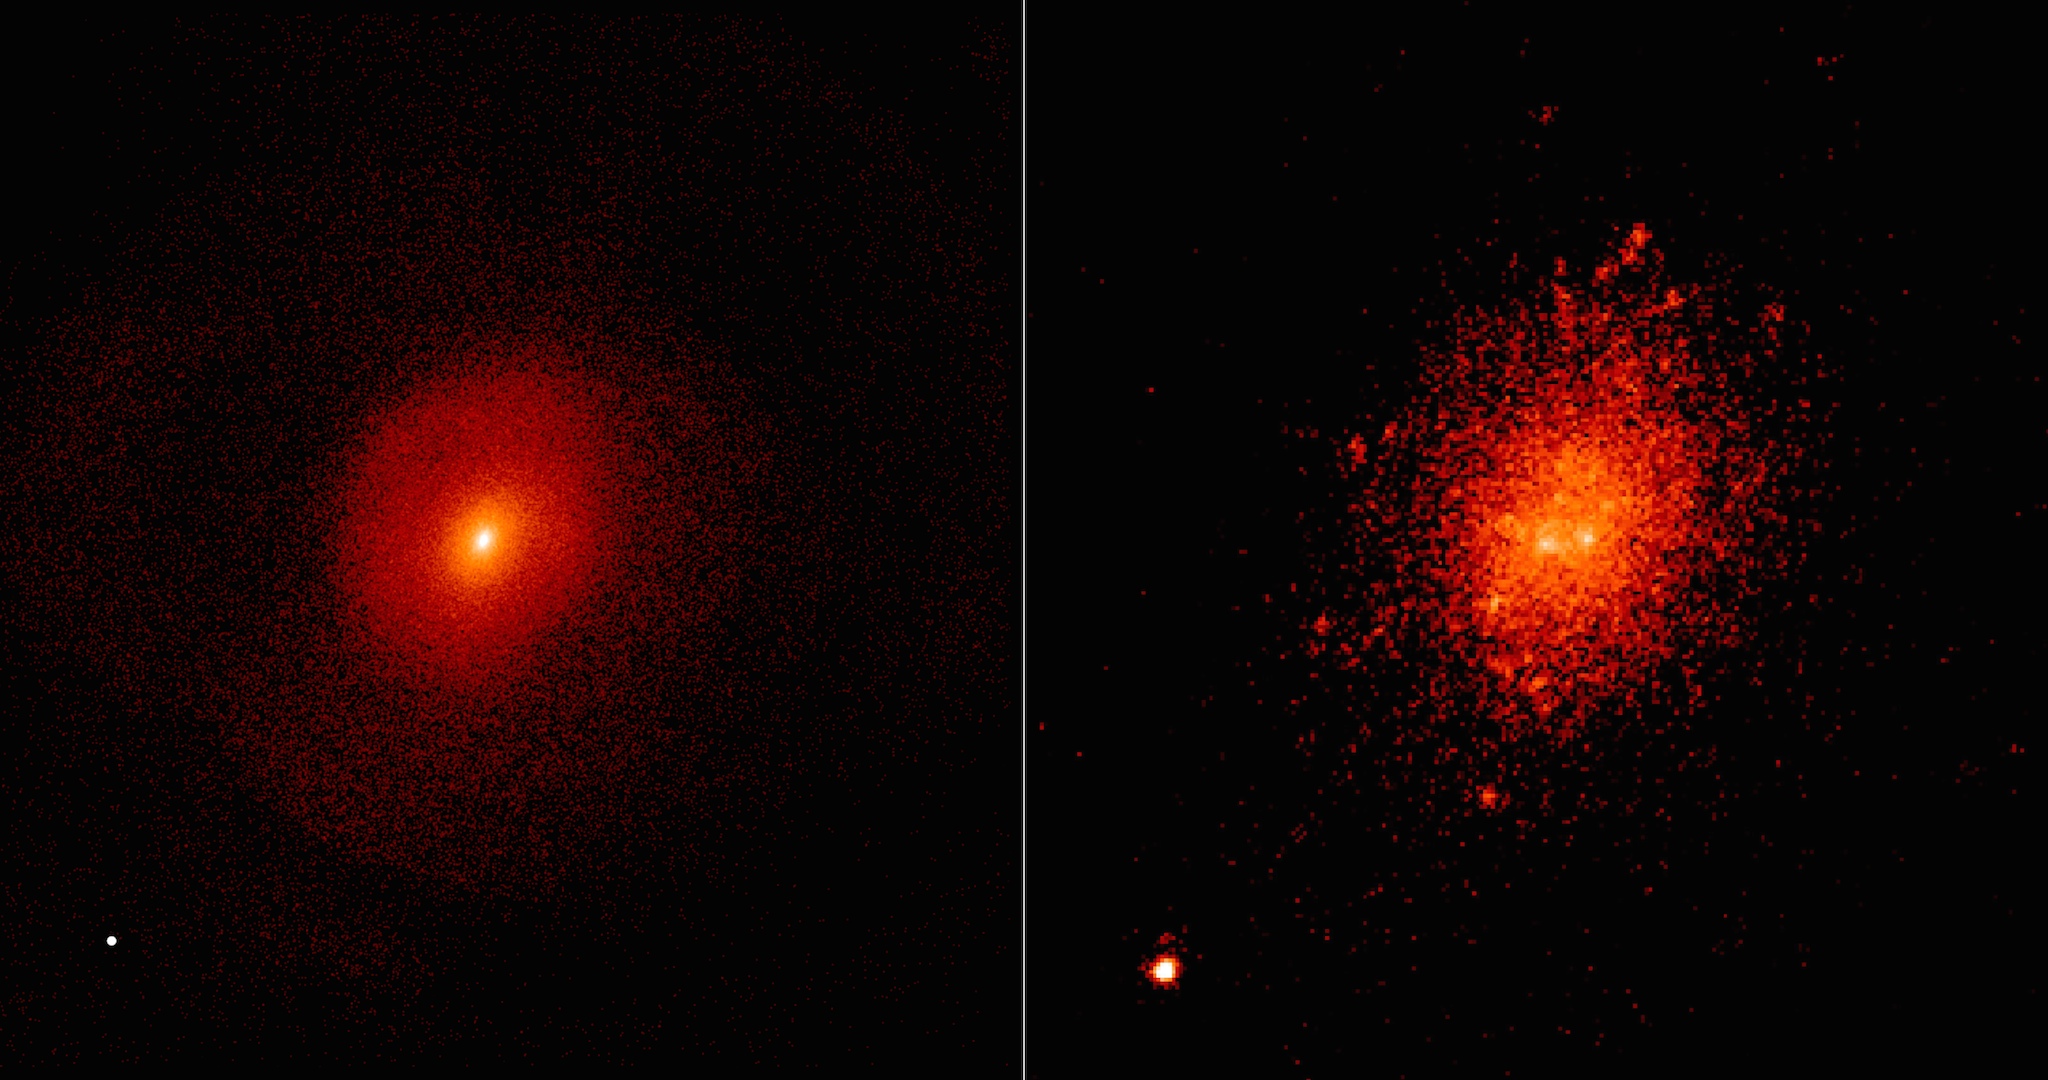 A simulation of two colliding galaxies (left) shows how their coalescing supermassive black holes can launch the resulting larger black hole (dot, lower left) on a wide orbit. Right: Compare the simulation with this Keck II near-infrared image of Markarian 177 and SDSS1133 (lower left).  Credit: Simulation, L. Blecha (UMD); image, W. M. Keck Observatory/M. Koss (ETH Zurich) et al.